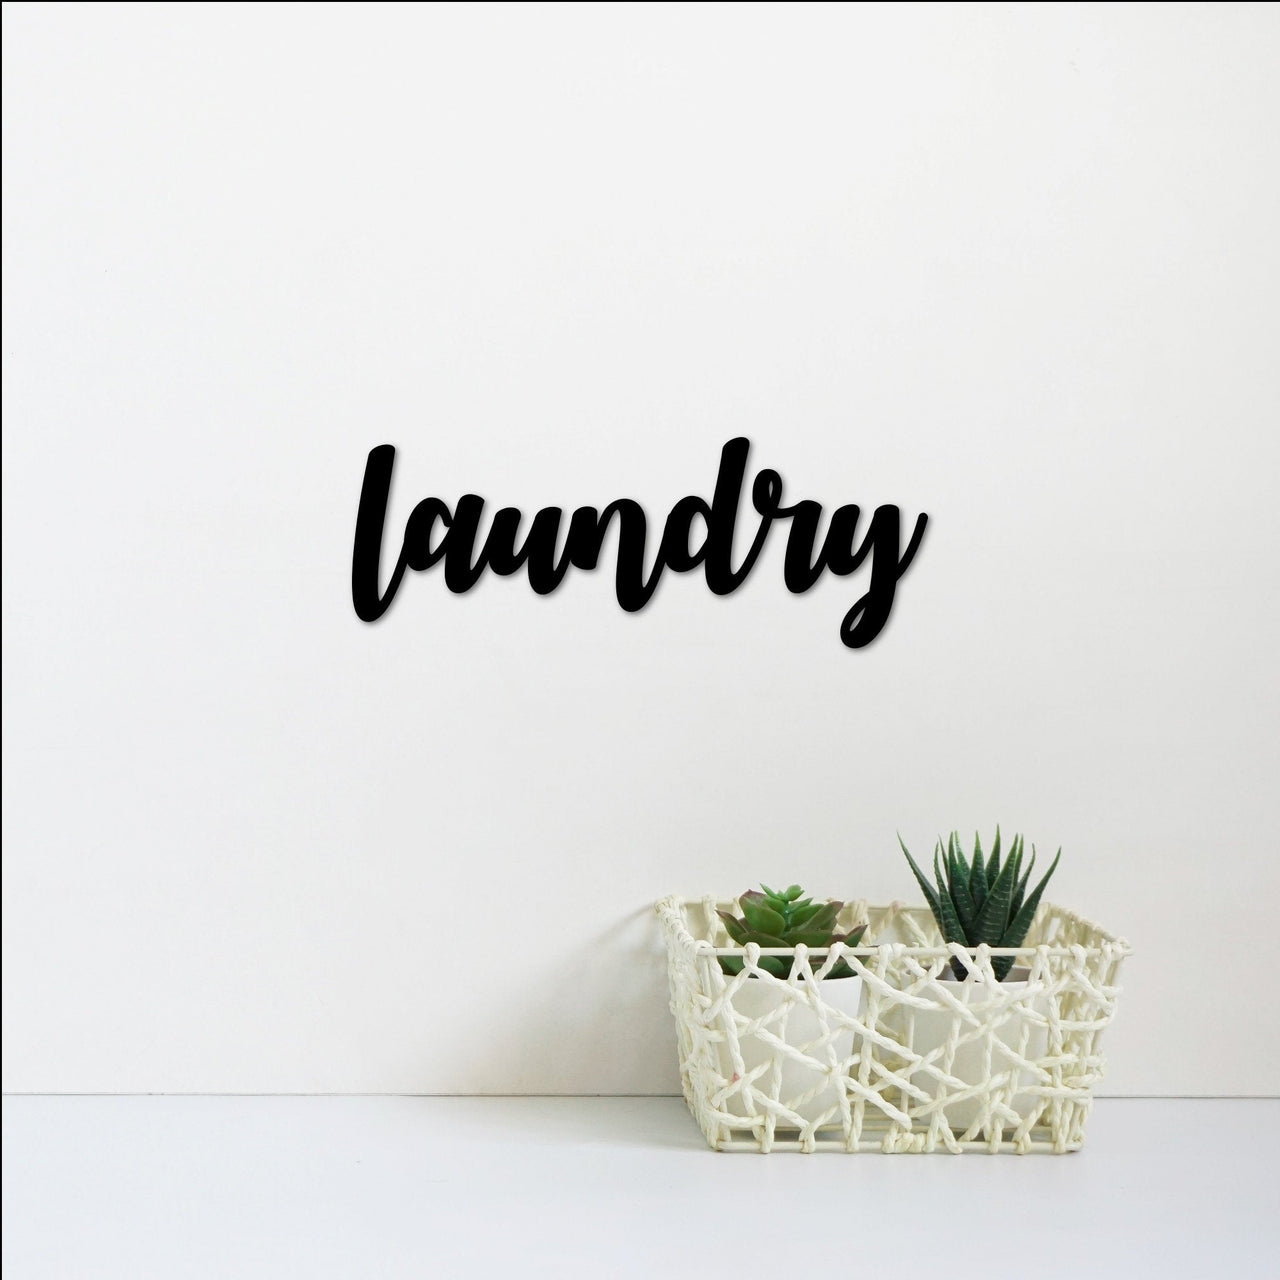 Laundry Room Sign | Metal Laundry Sign | Metal Wall Art | Laundry Decor | Script Wall Art | Door Decorations | Metal Letters | Laundry Gift